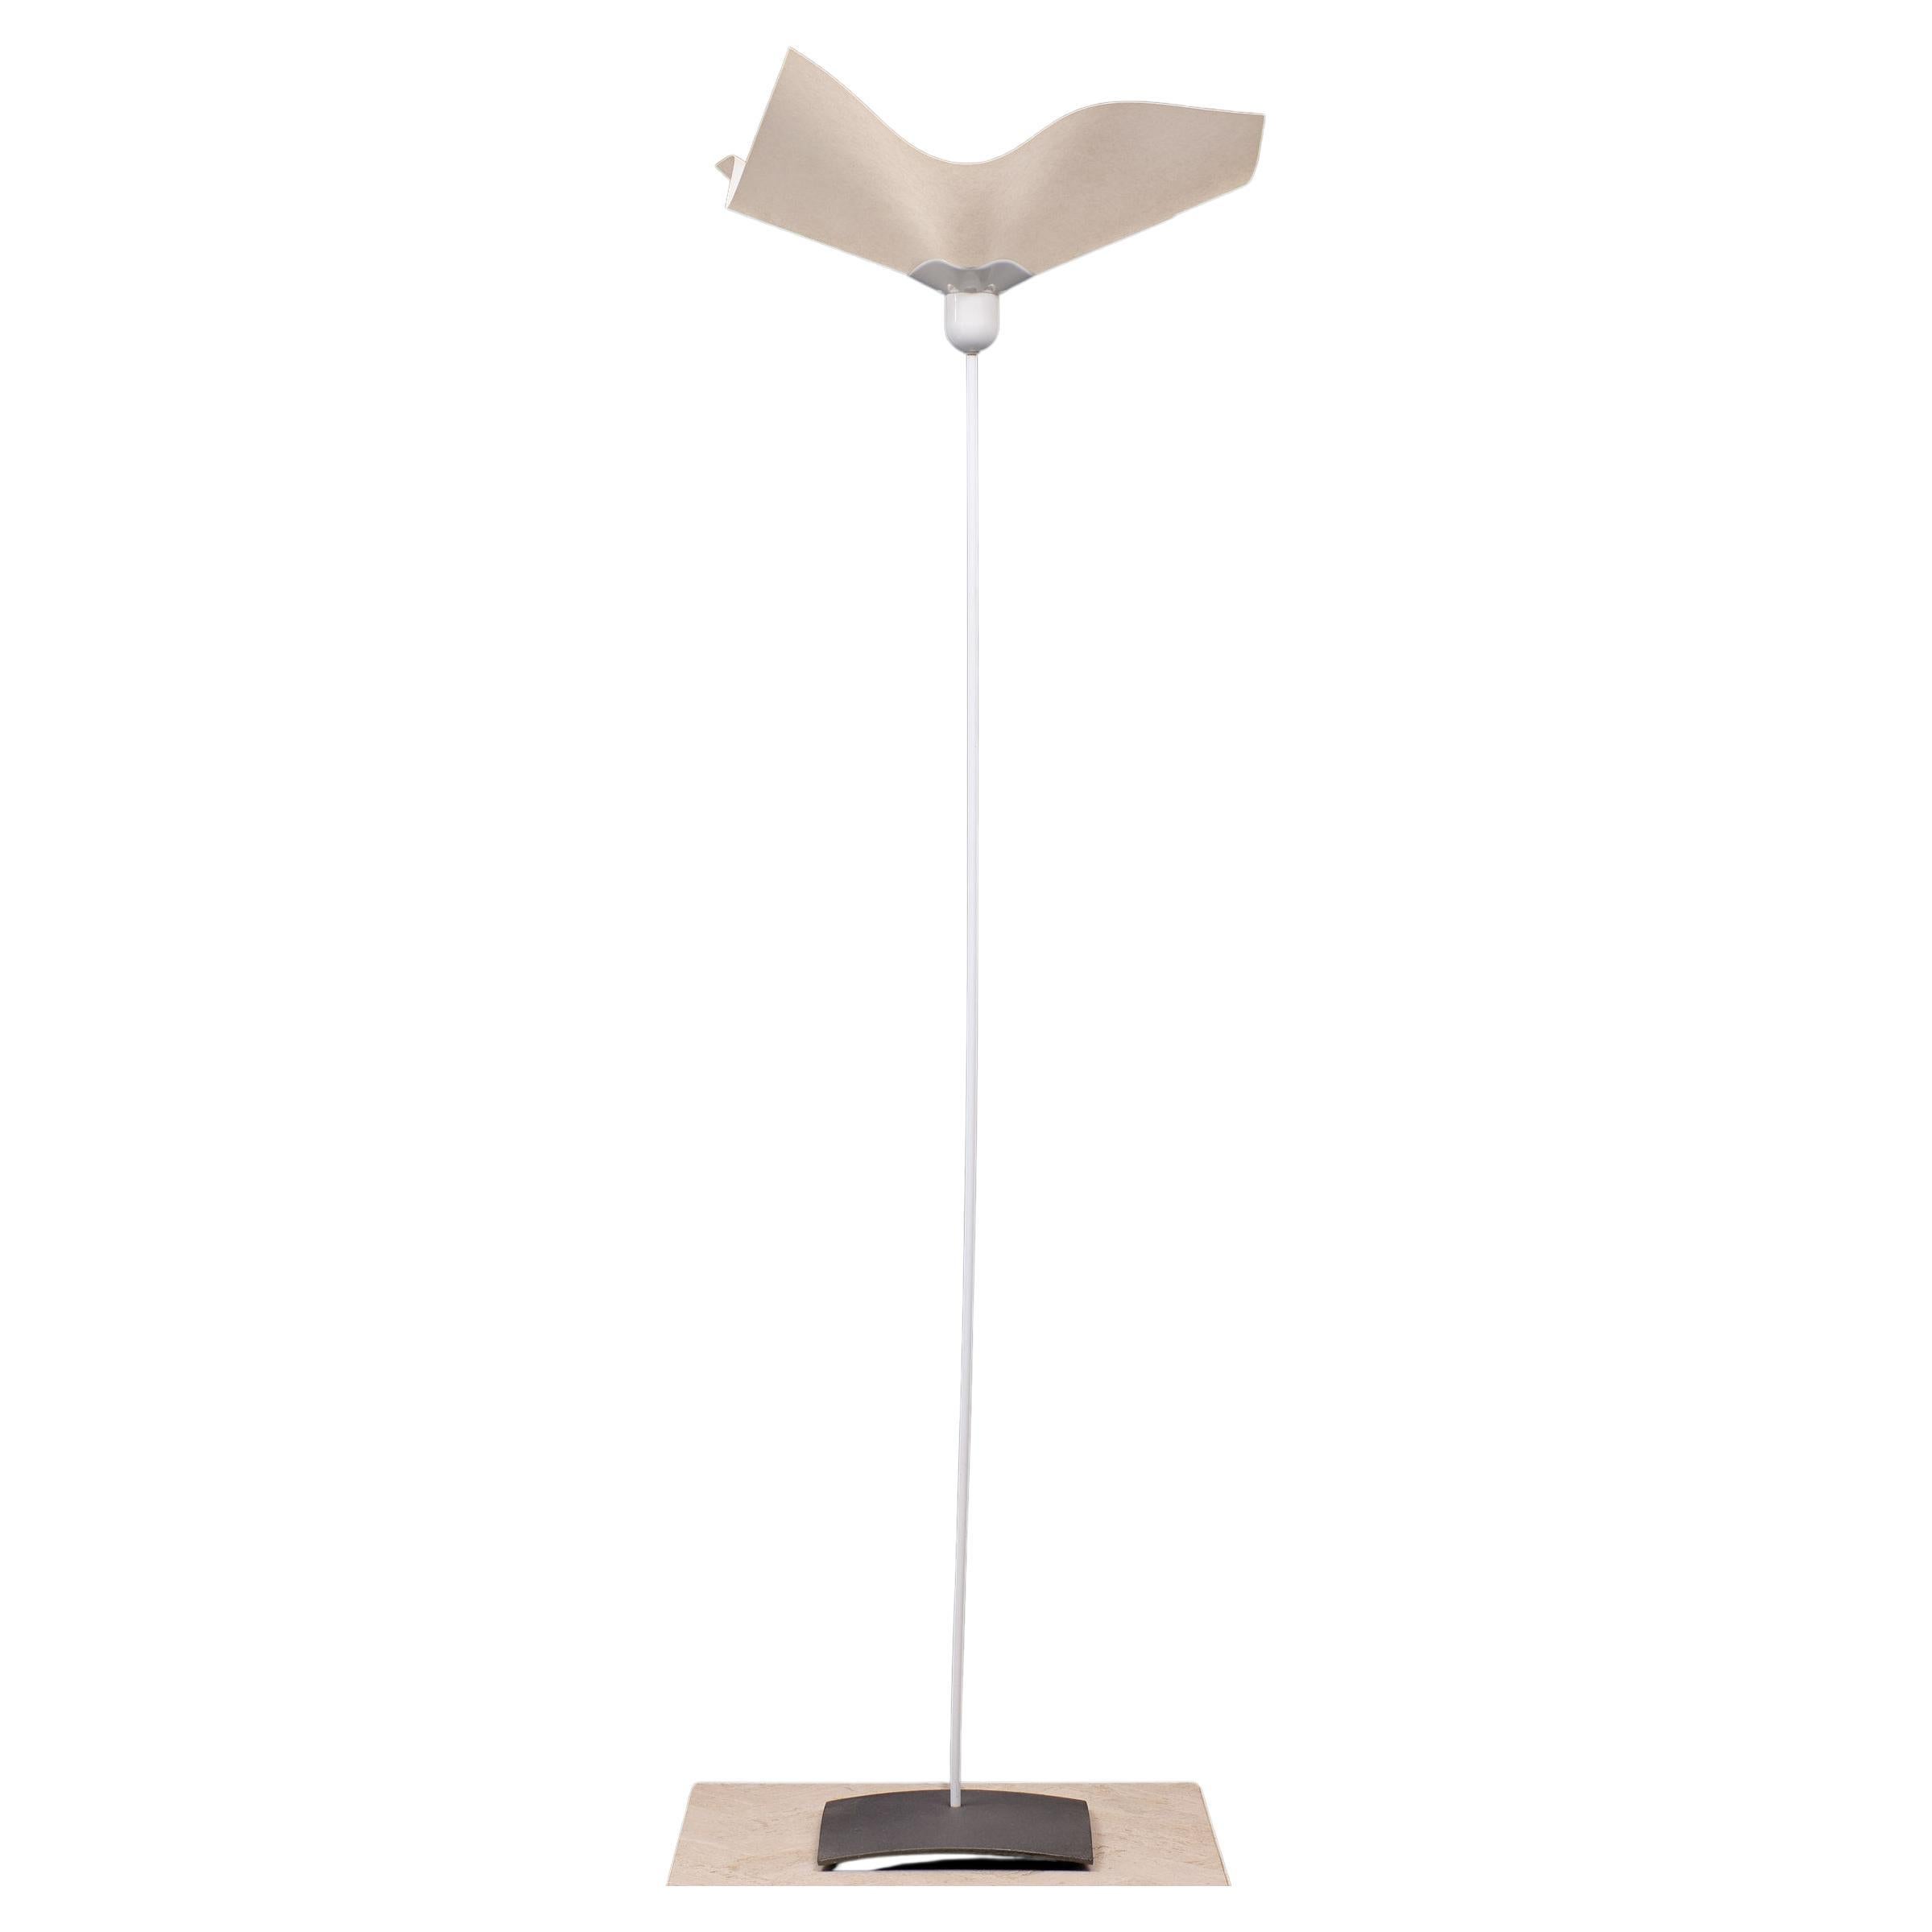 Beautiful Floor lamp .Model Area 50 Design by Mario Bellini 1974 for Artimide Italy
Materials: Square Grey painted cast iron base. White lacquered metal rod. Body in poly-carbonate. Synthetic textile fabric lampshade. Bakelite E27 socket..
Bought